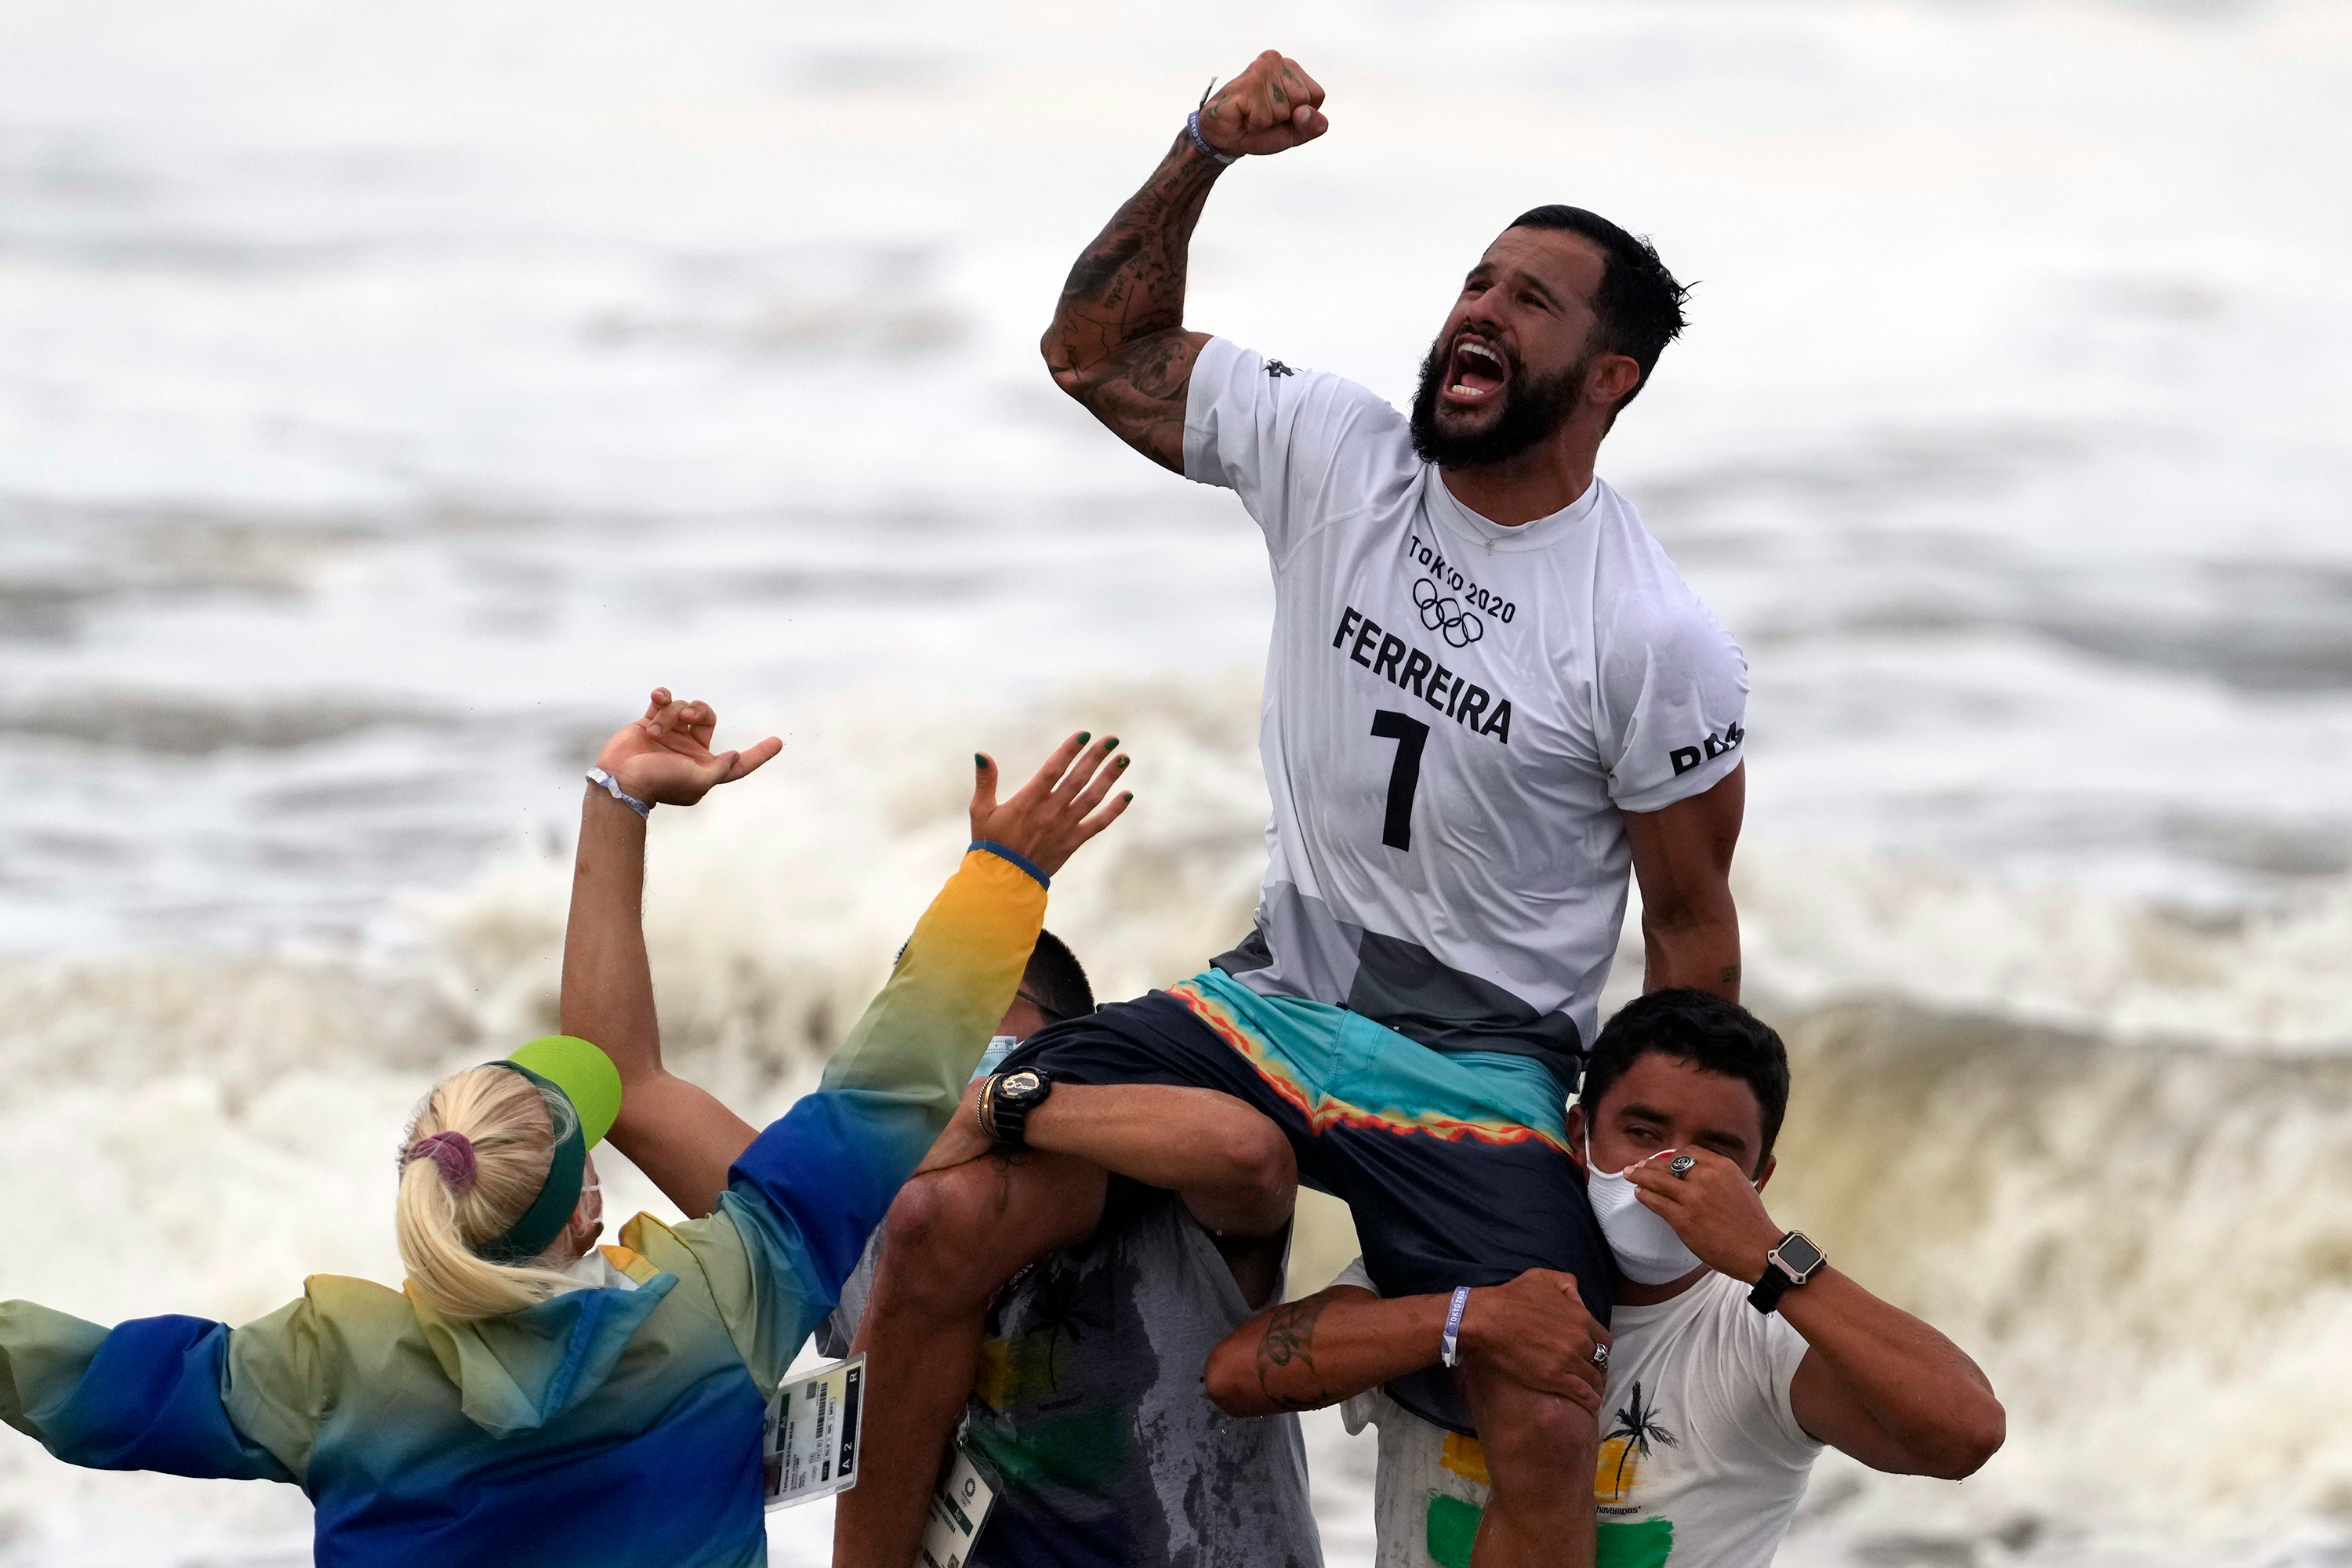 1) Brazil's Italo Ferreira makes history as the inaugural Olympic surfing gold medalist